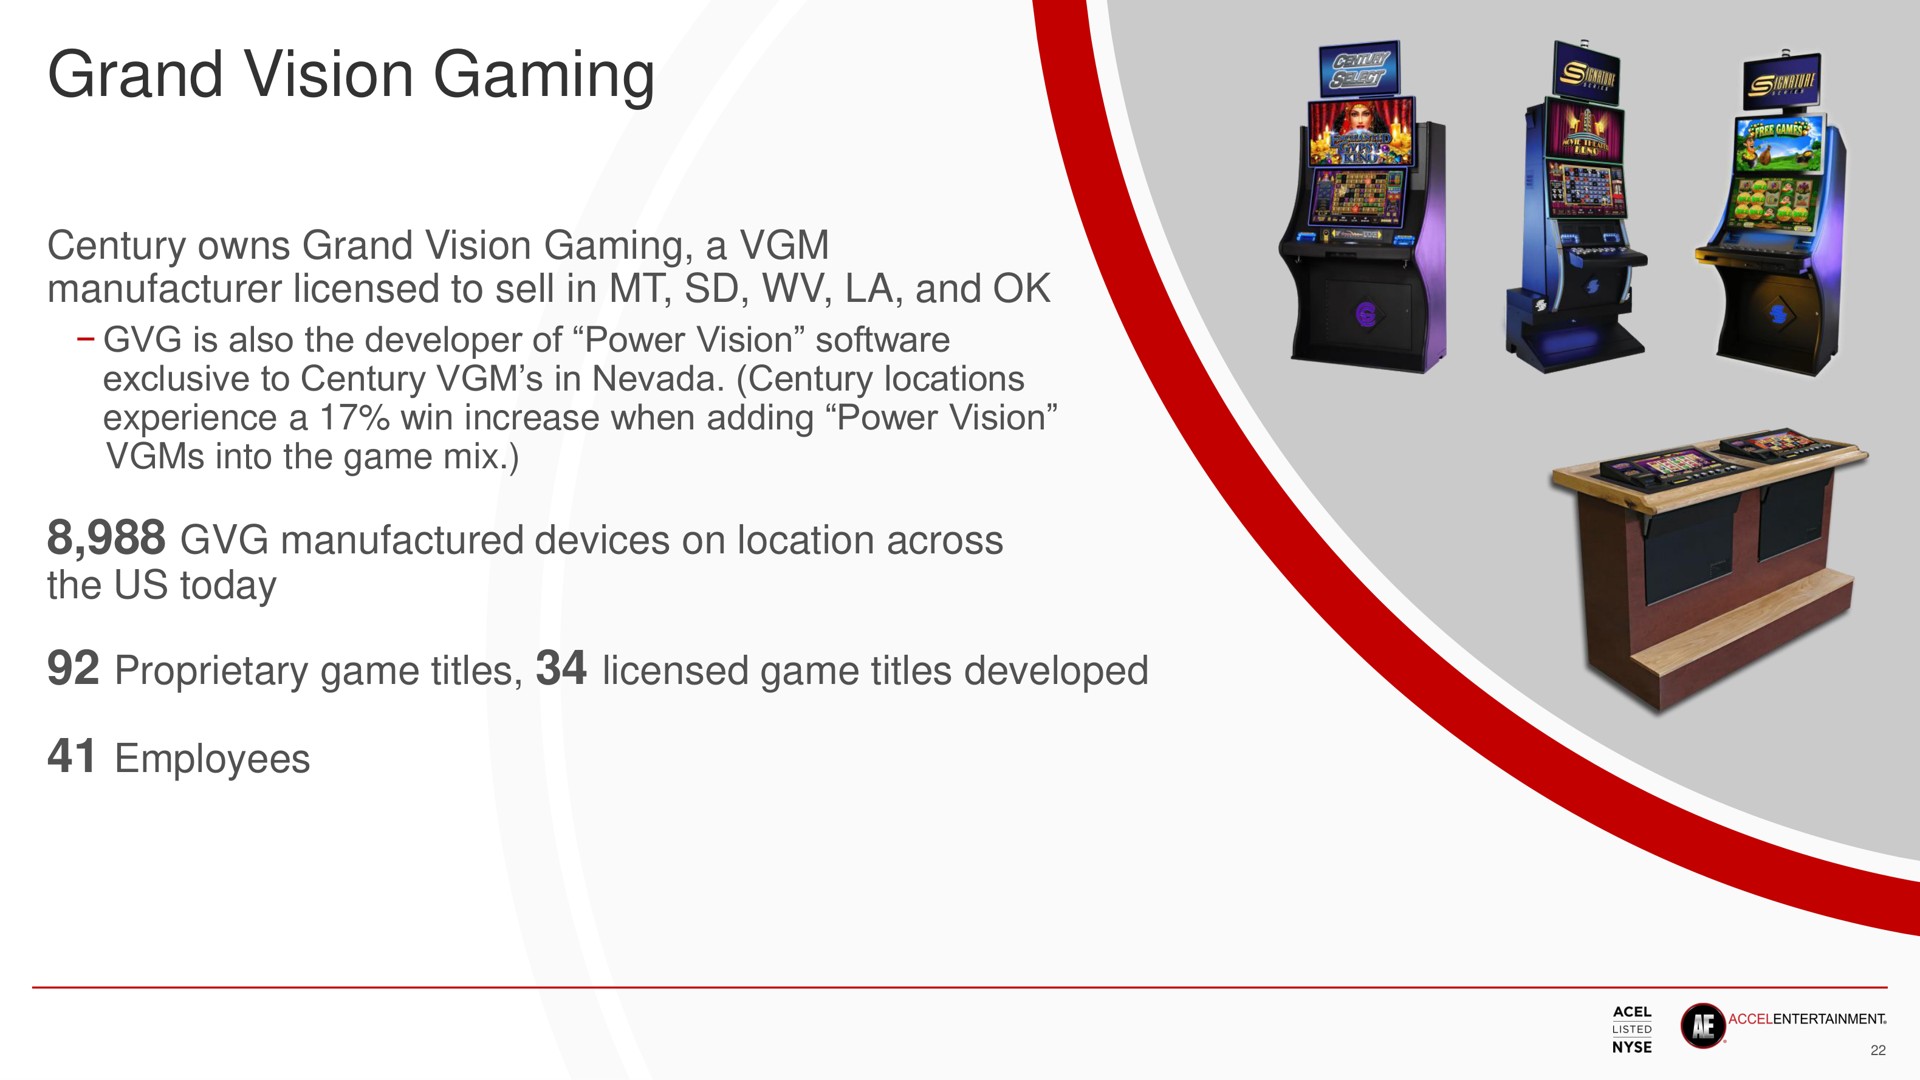 grand vision gaming manufactured devices on location across | Accel Entertaiment